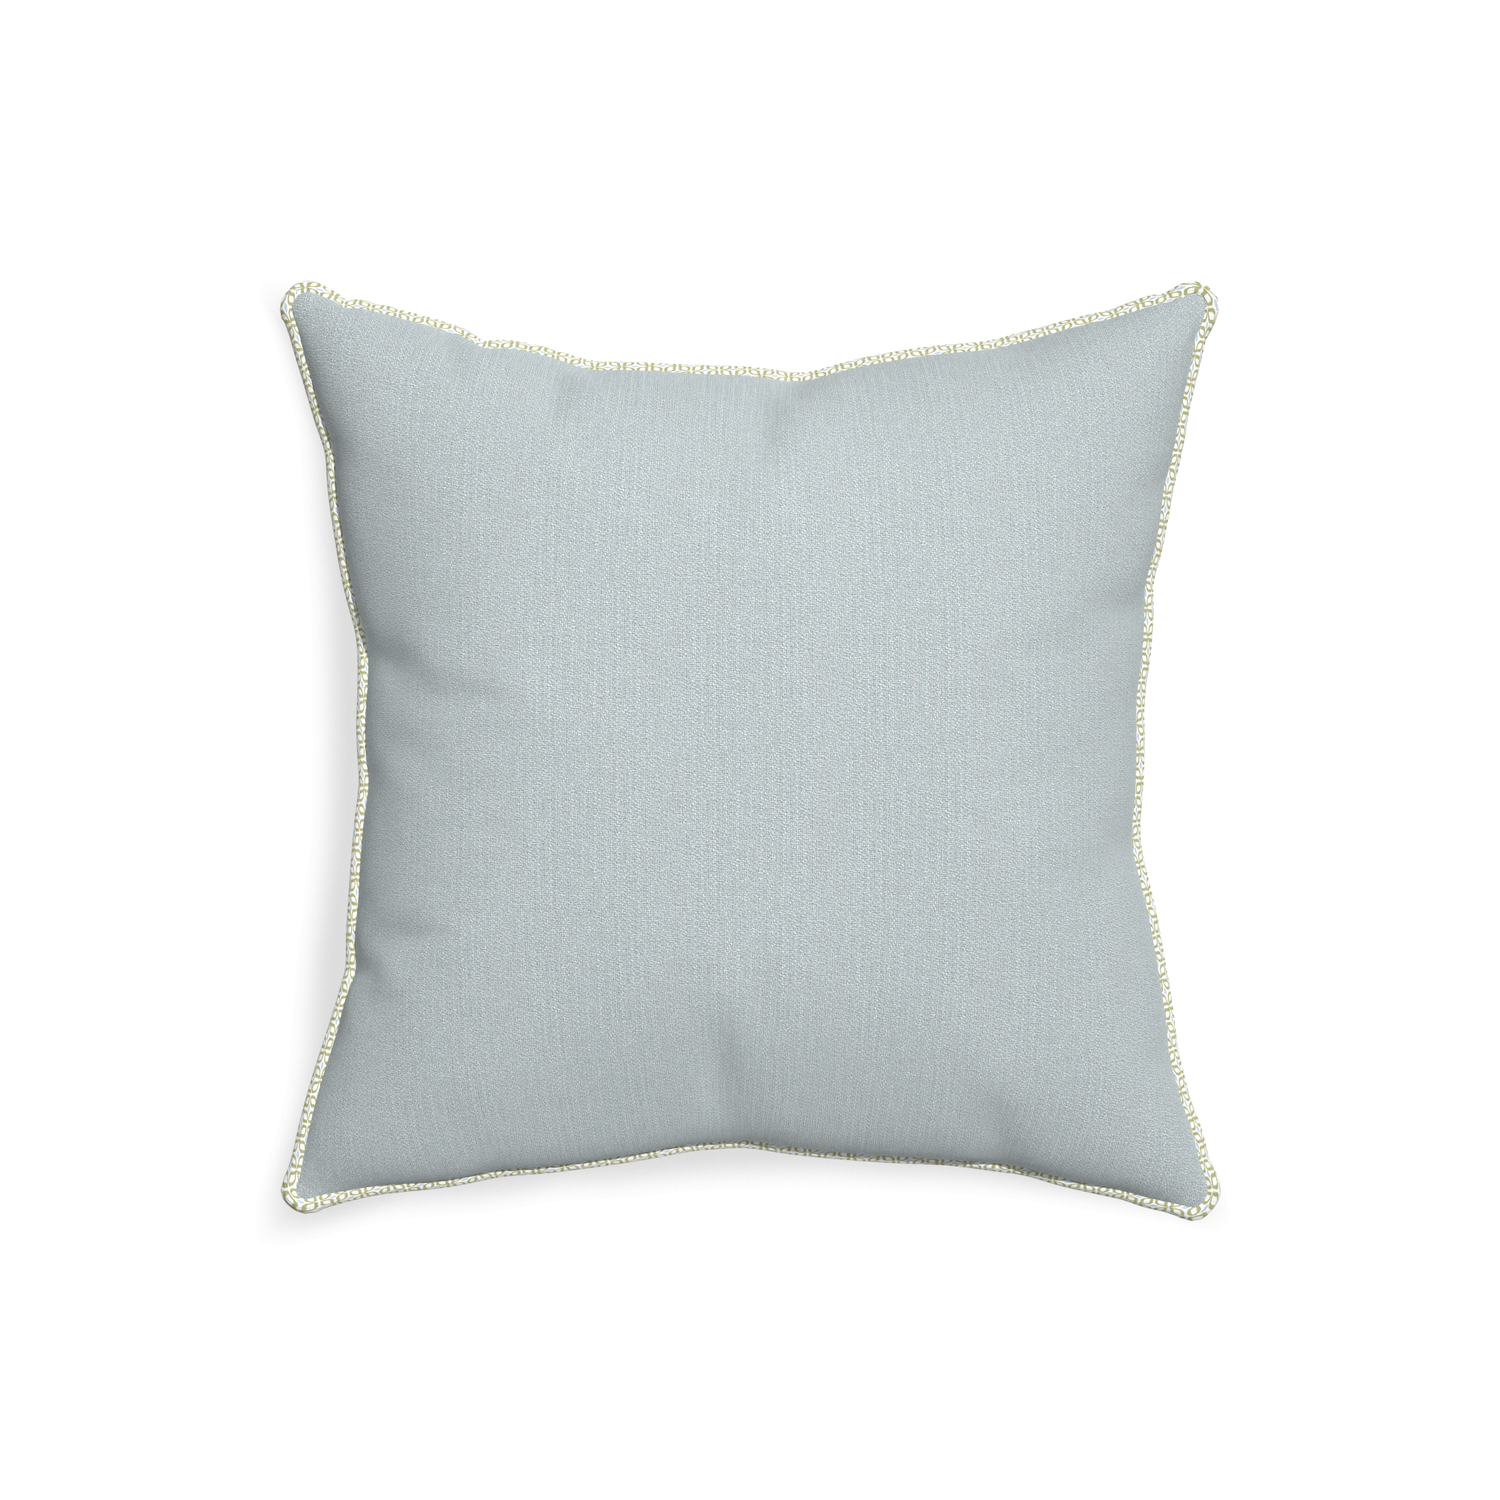 20-square sea custom grey bluepillow with l piping on white background